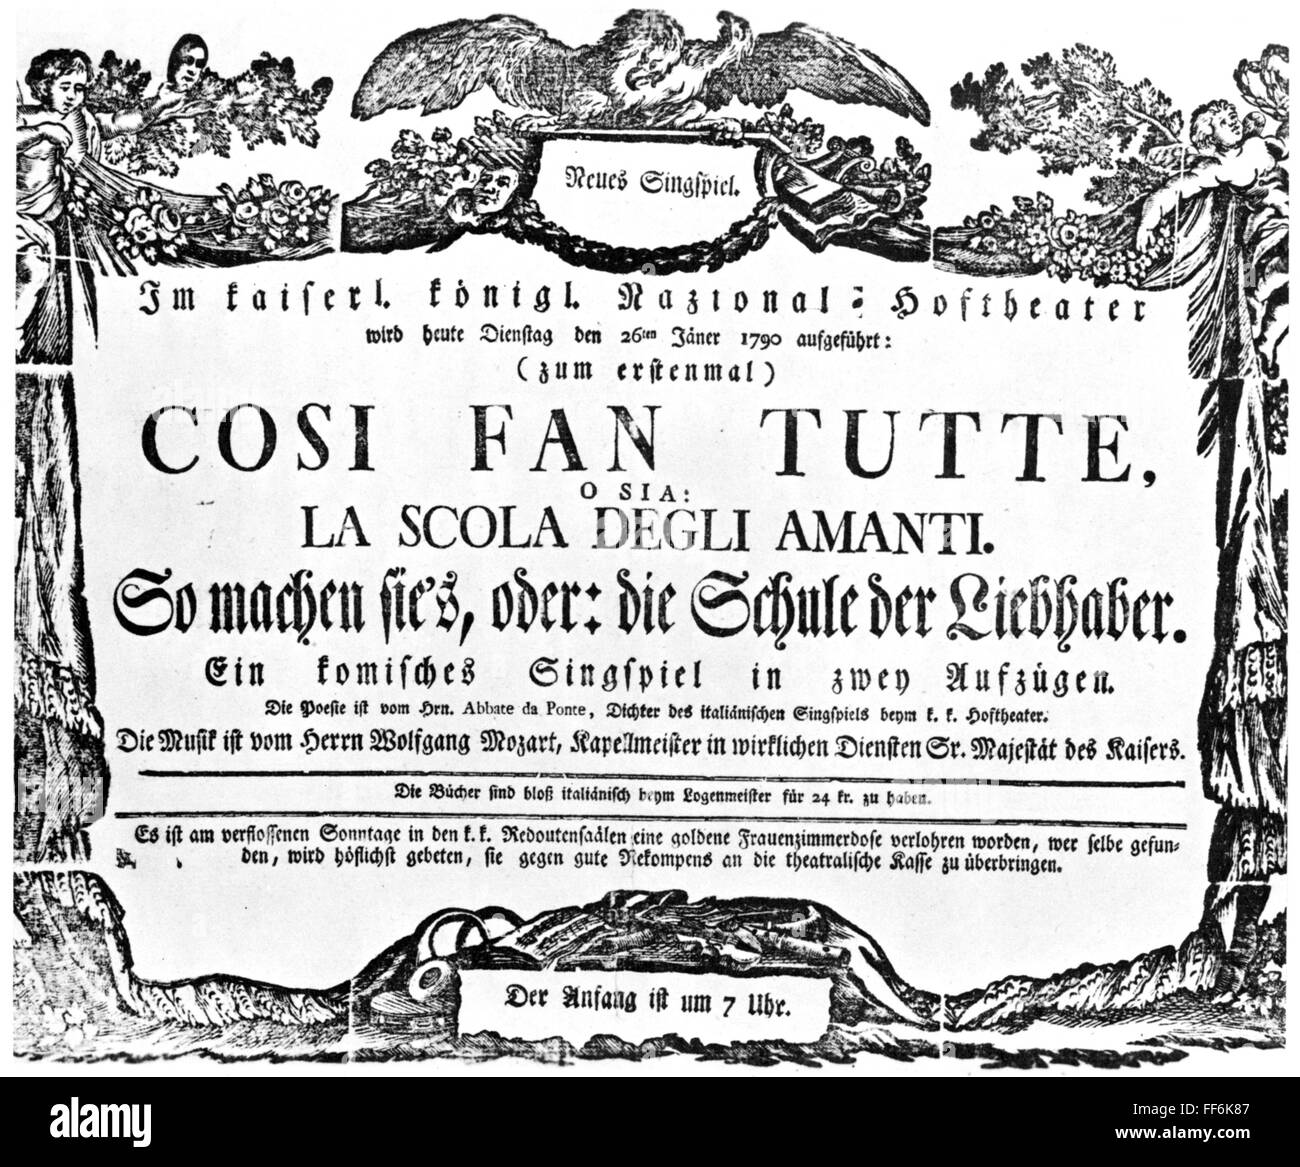 MOZART: COSI FAN TUTTE. /nPoster announcing the first performance of  Wolfgang Amadeus Mozart's 'Cosi Fan Tutte' at the Hofburgtheater, Vienna,  on Tuesday, 26 January 1790 Stock Photo - Alamy